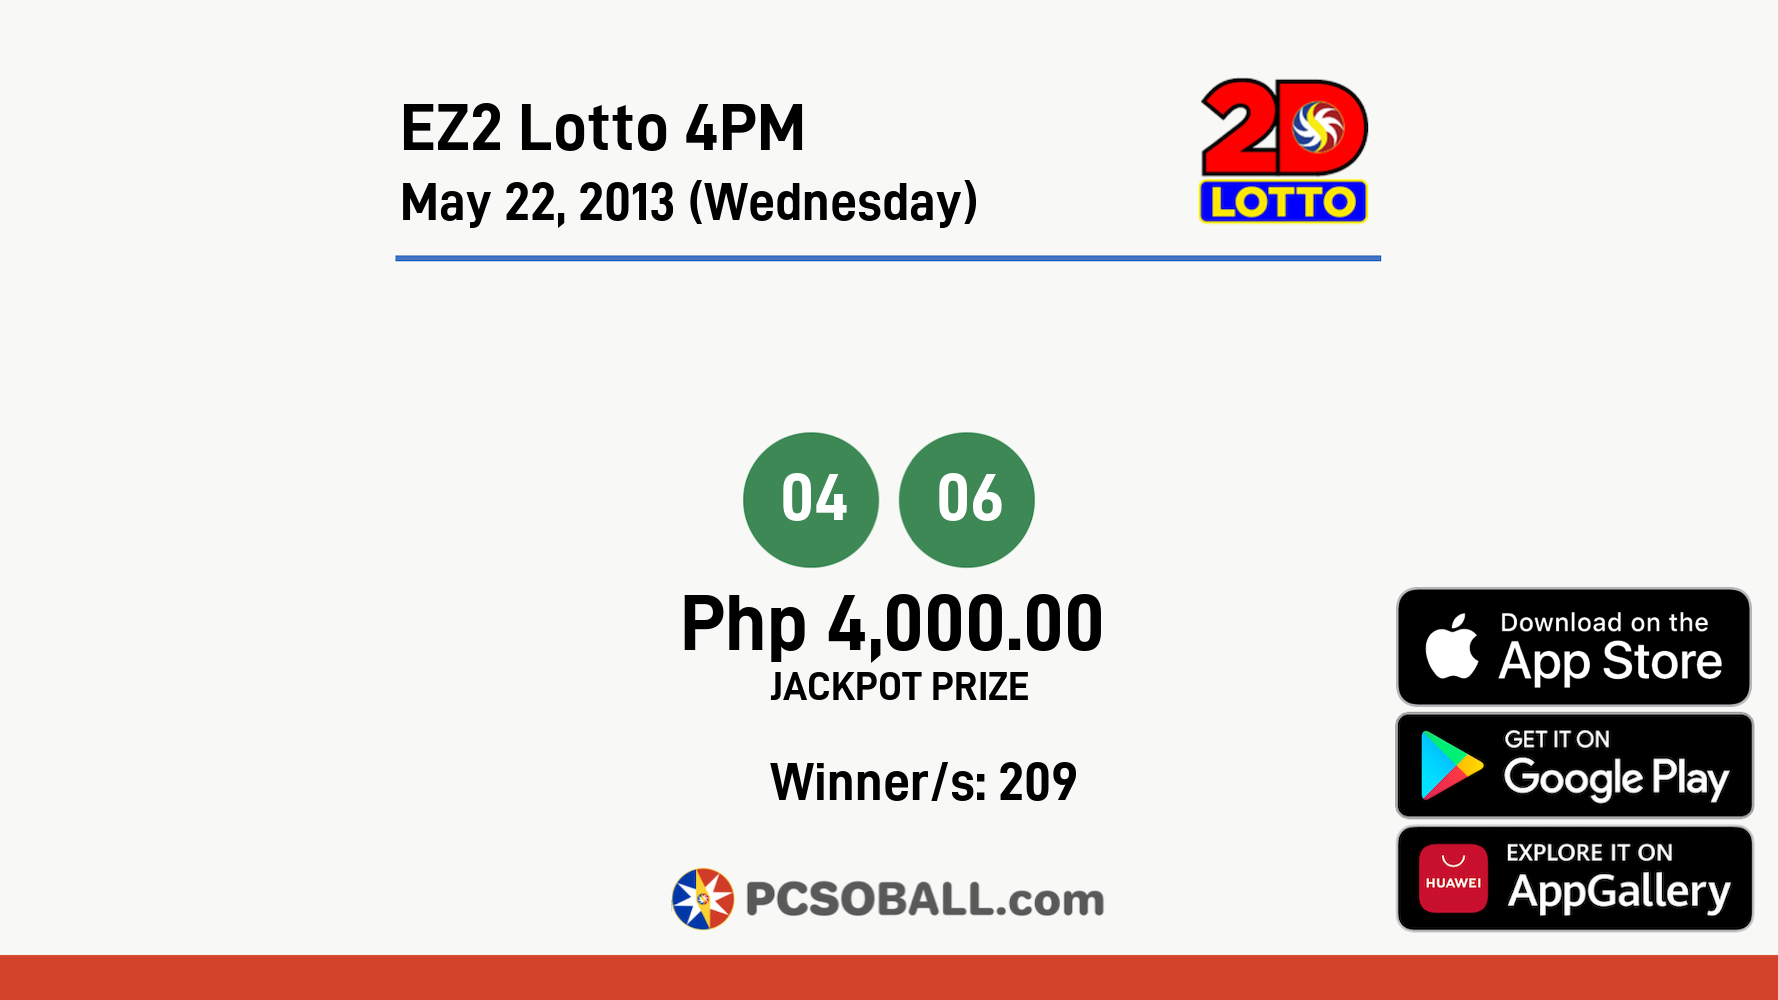 EZ2 Lotto 4PM May 22, 2013 (Wednesday) Result